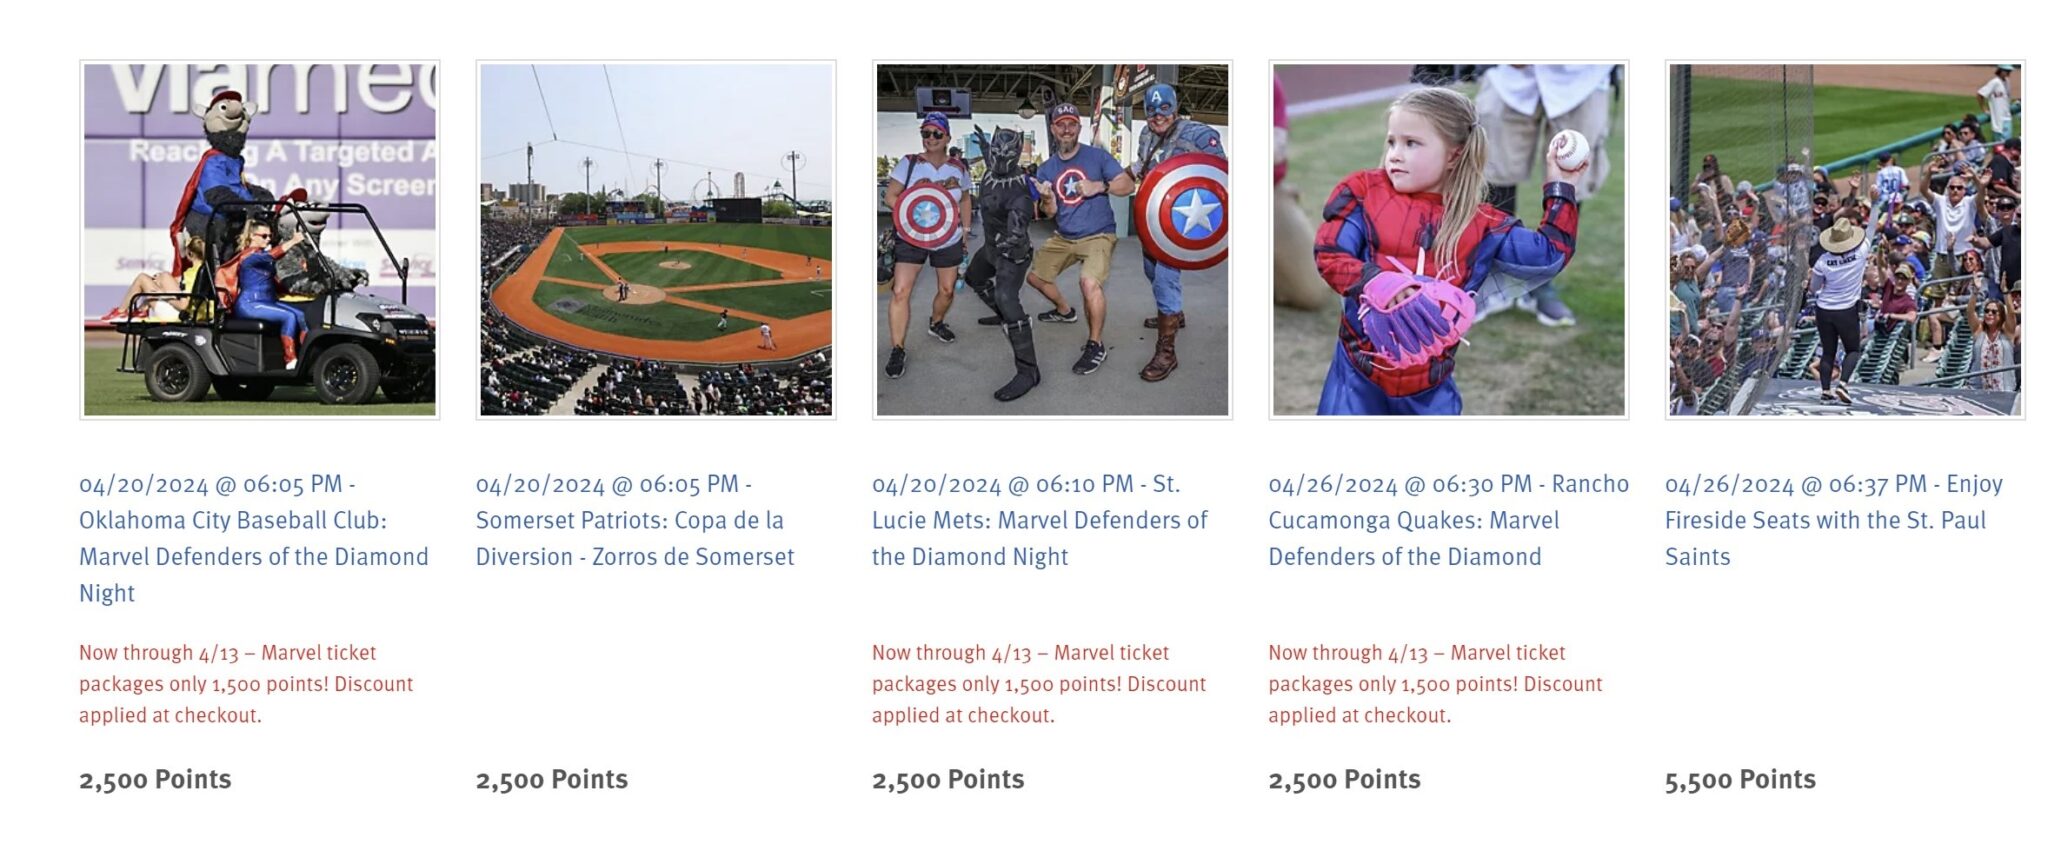 Wyndham offering Marvel-themed Minor League Baseball tickets for